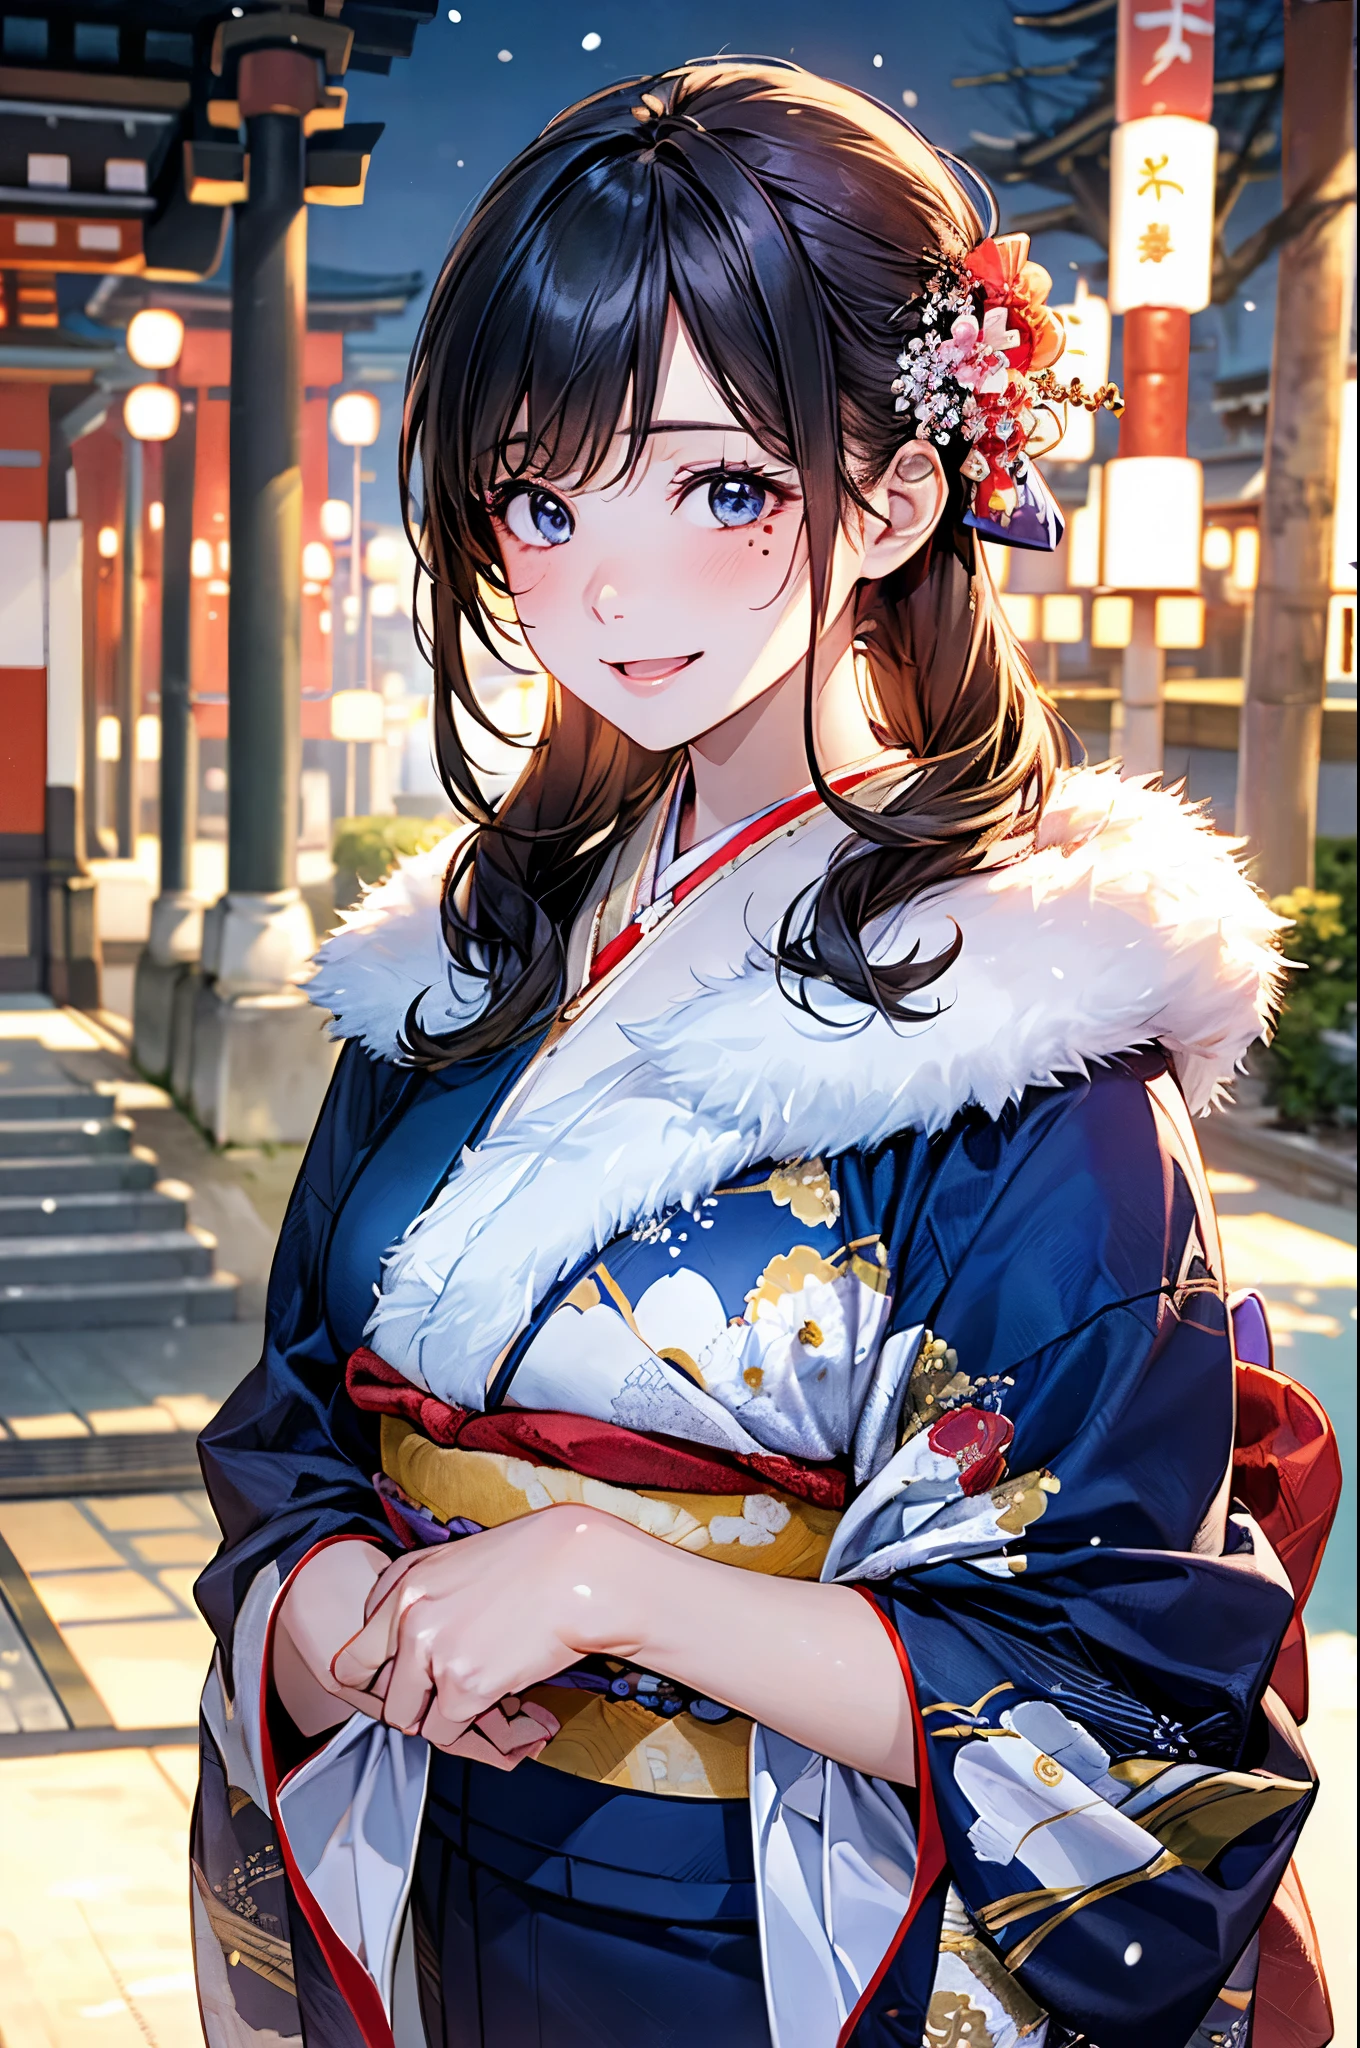 ((perfect anatomy, anatomically correct, super detailed skin)), 
1 girl, japanese, high school girl, shiny skin, large breasts:0.5, looking up, watching the view, 
beautiful hair, beautiful face, beautiful detailed eyes, (middle hair:1.5, japanese hair:1.5), black hair, blue eyes, babyface, mole under eye, 
(((dark blue kimono, luxury floral kimono, fur muffler), hair ornament)), 
((smile:1.5, open your mouth wide)), walking, 
(beautiful scenery), winter, dawn, (new year's day, first visit), hokkaido, sapporo, outside hokkaido shrine, crowd, snow, snowfall:1.5, freezing weather, frost, 
(8k, top-quality, masterpiece​:1.2, extremely detailed), (photorealistic), beautiful art, visual art, depth of fields, natural lighting,